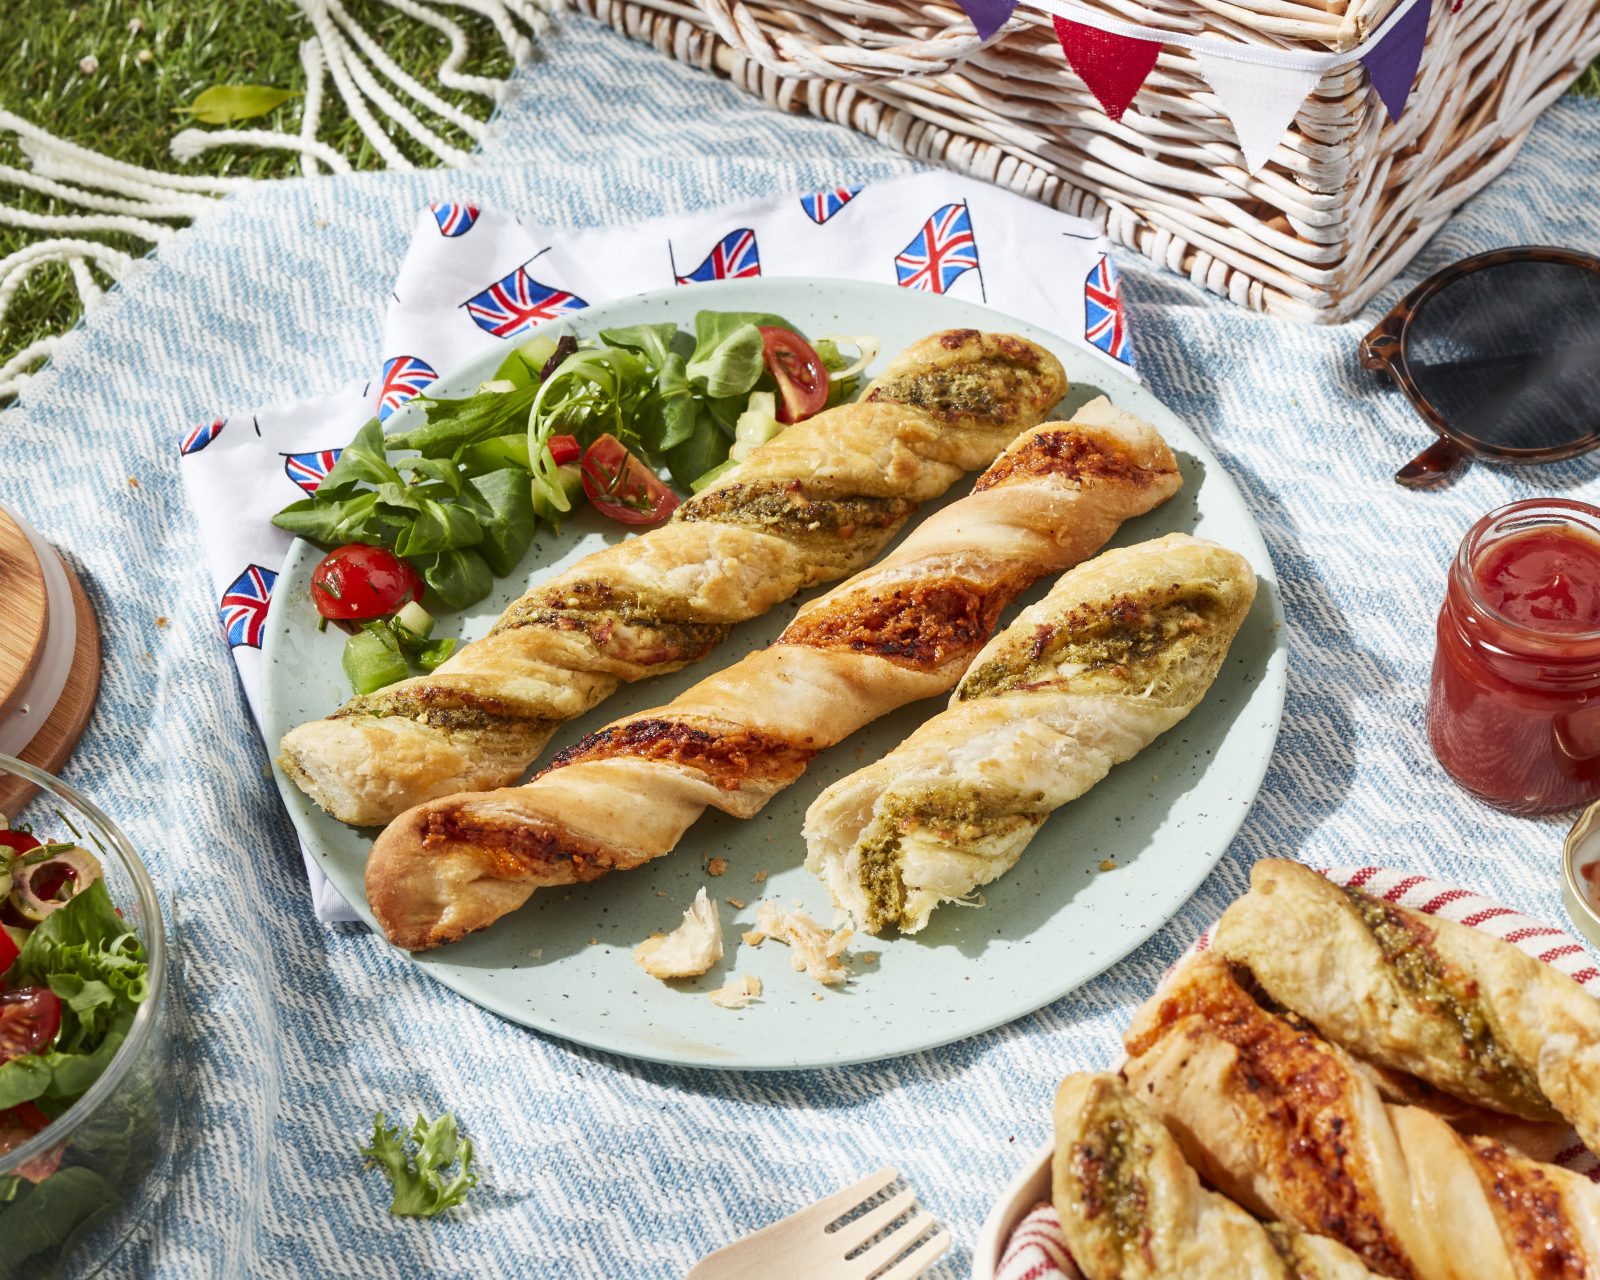 Iceland has launched a &#8216;Jubilee Lunch&#8217; range with street party food from £1, The Manc